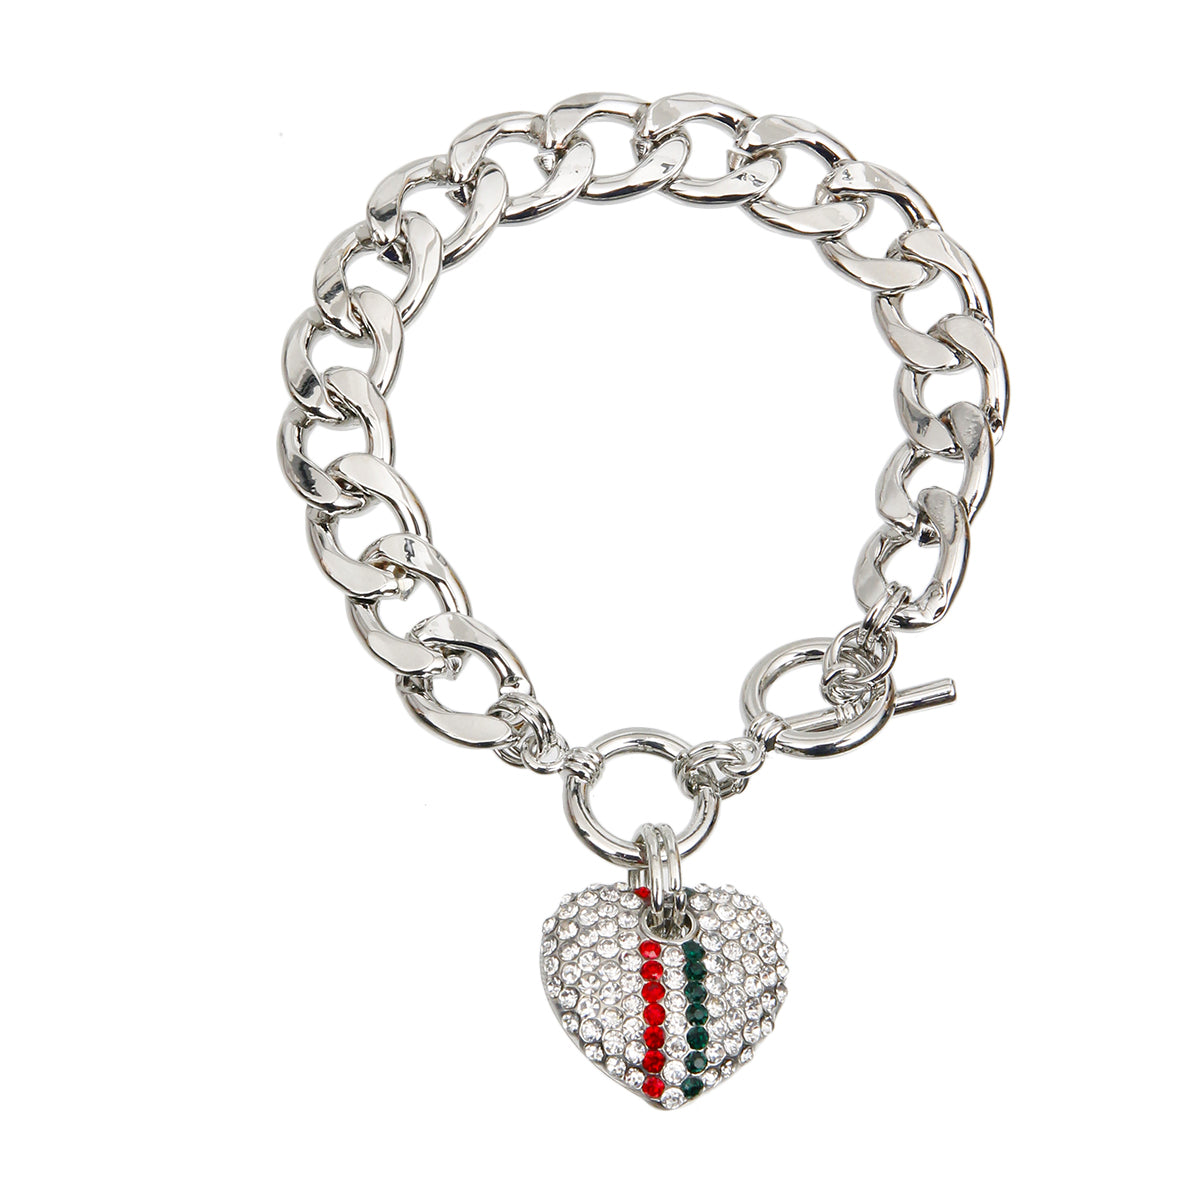 Designer Style Red and Green Rhinestone Striped Heart Toggle Bracelet